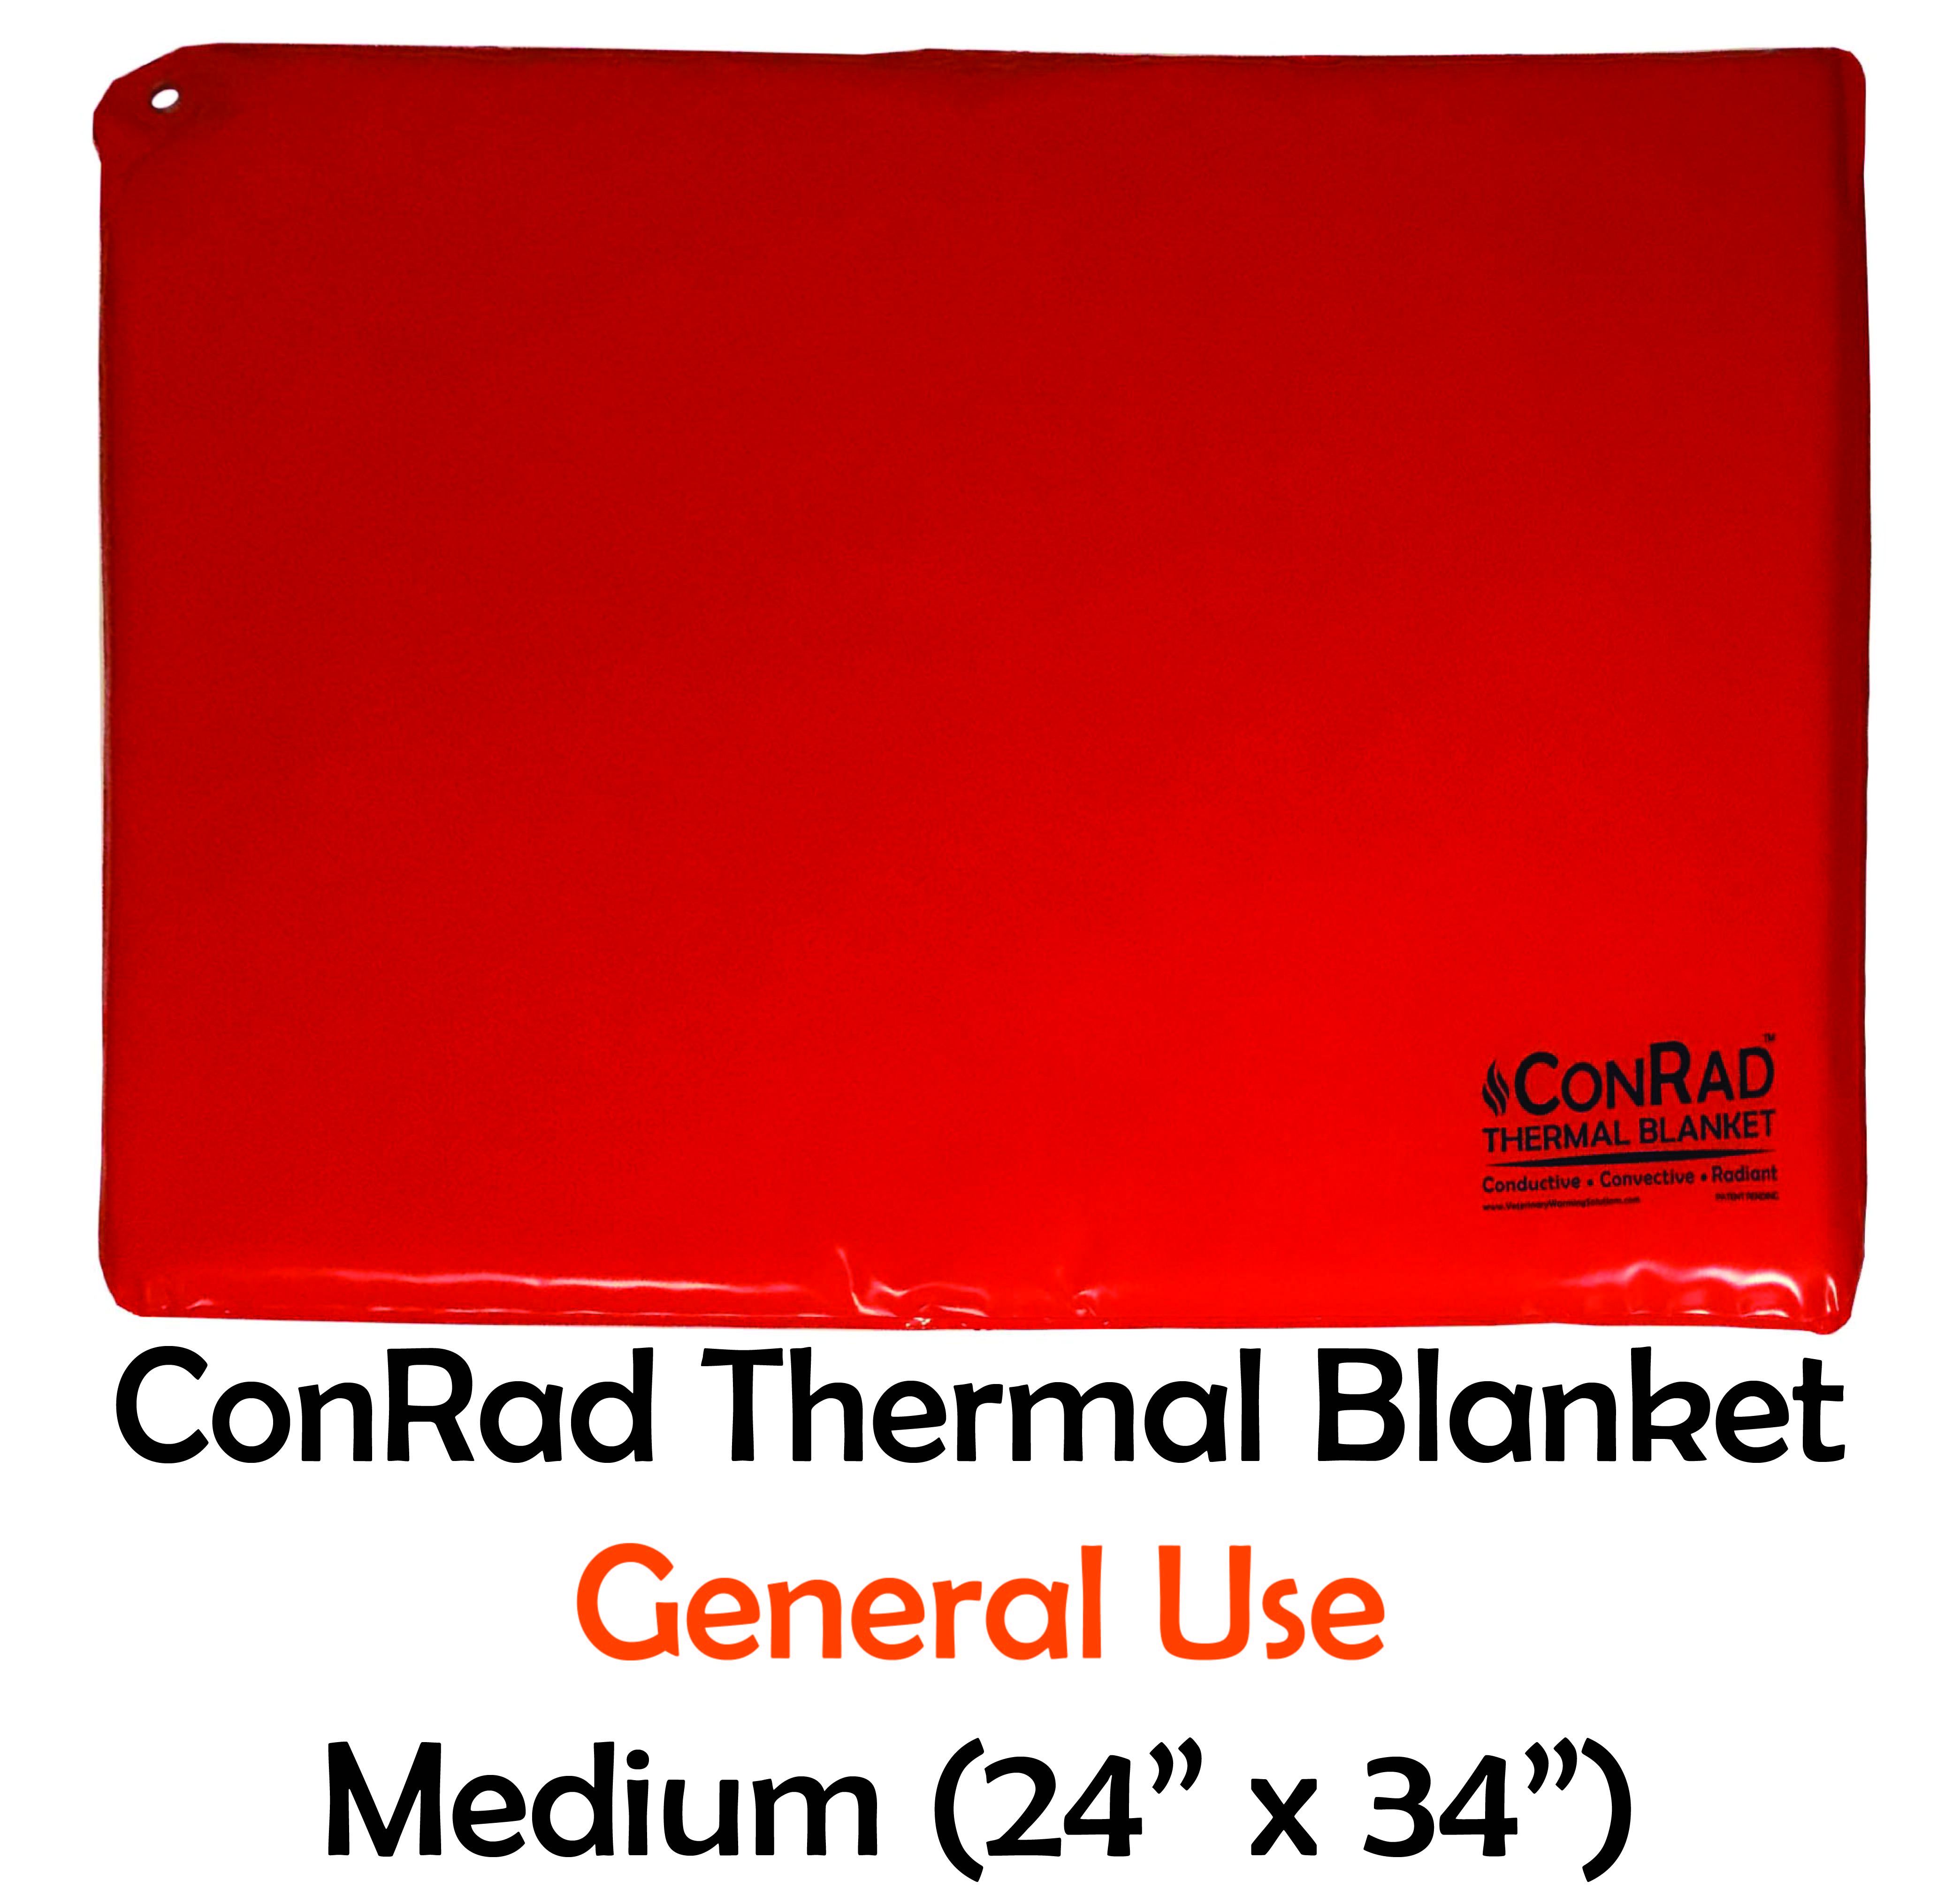 Veterinary Warming Solutions ConRad General Use Thermal Blanket